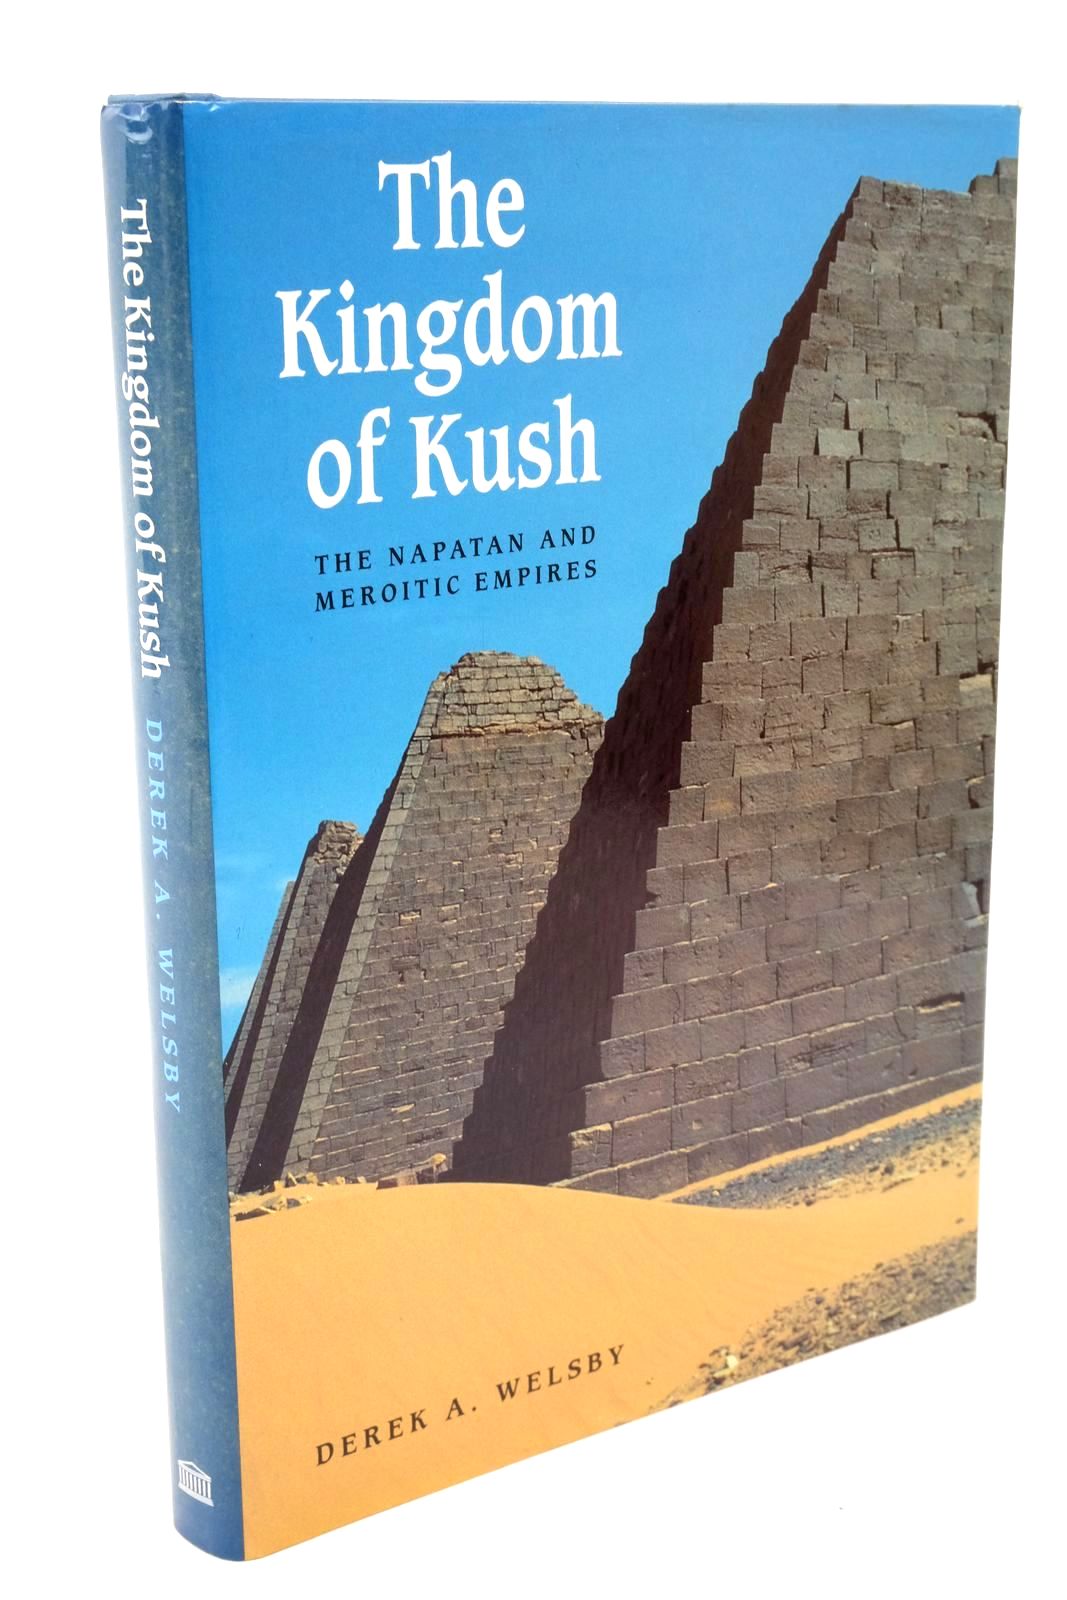 Photo of THE KINGDOM OF KUSH written by Welsby, Derek A. published by British Museum (STOCK CODE: 1322538)  for sale by Stella & Rose's Books